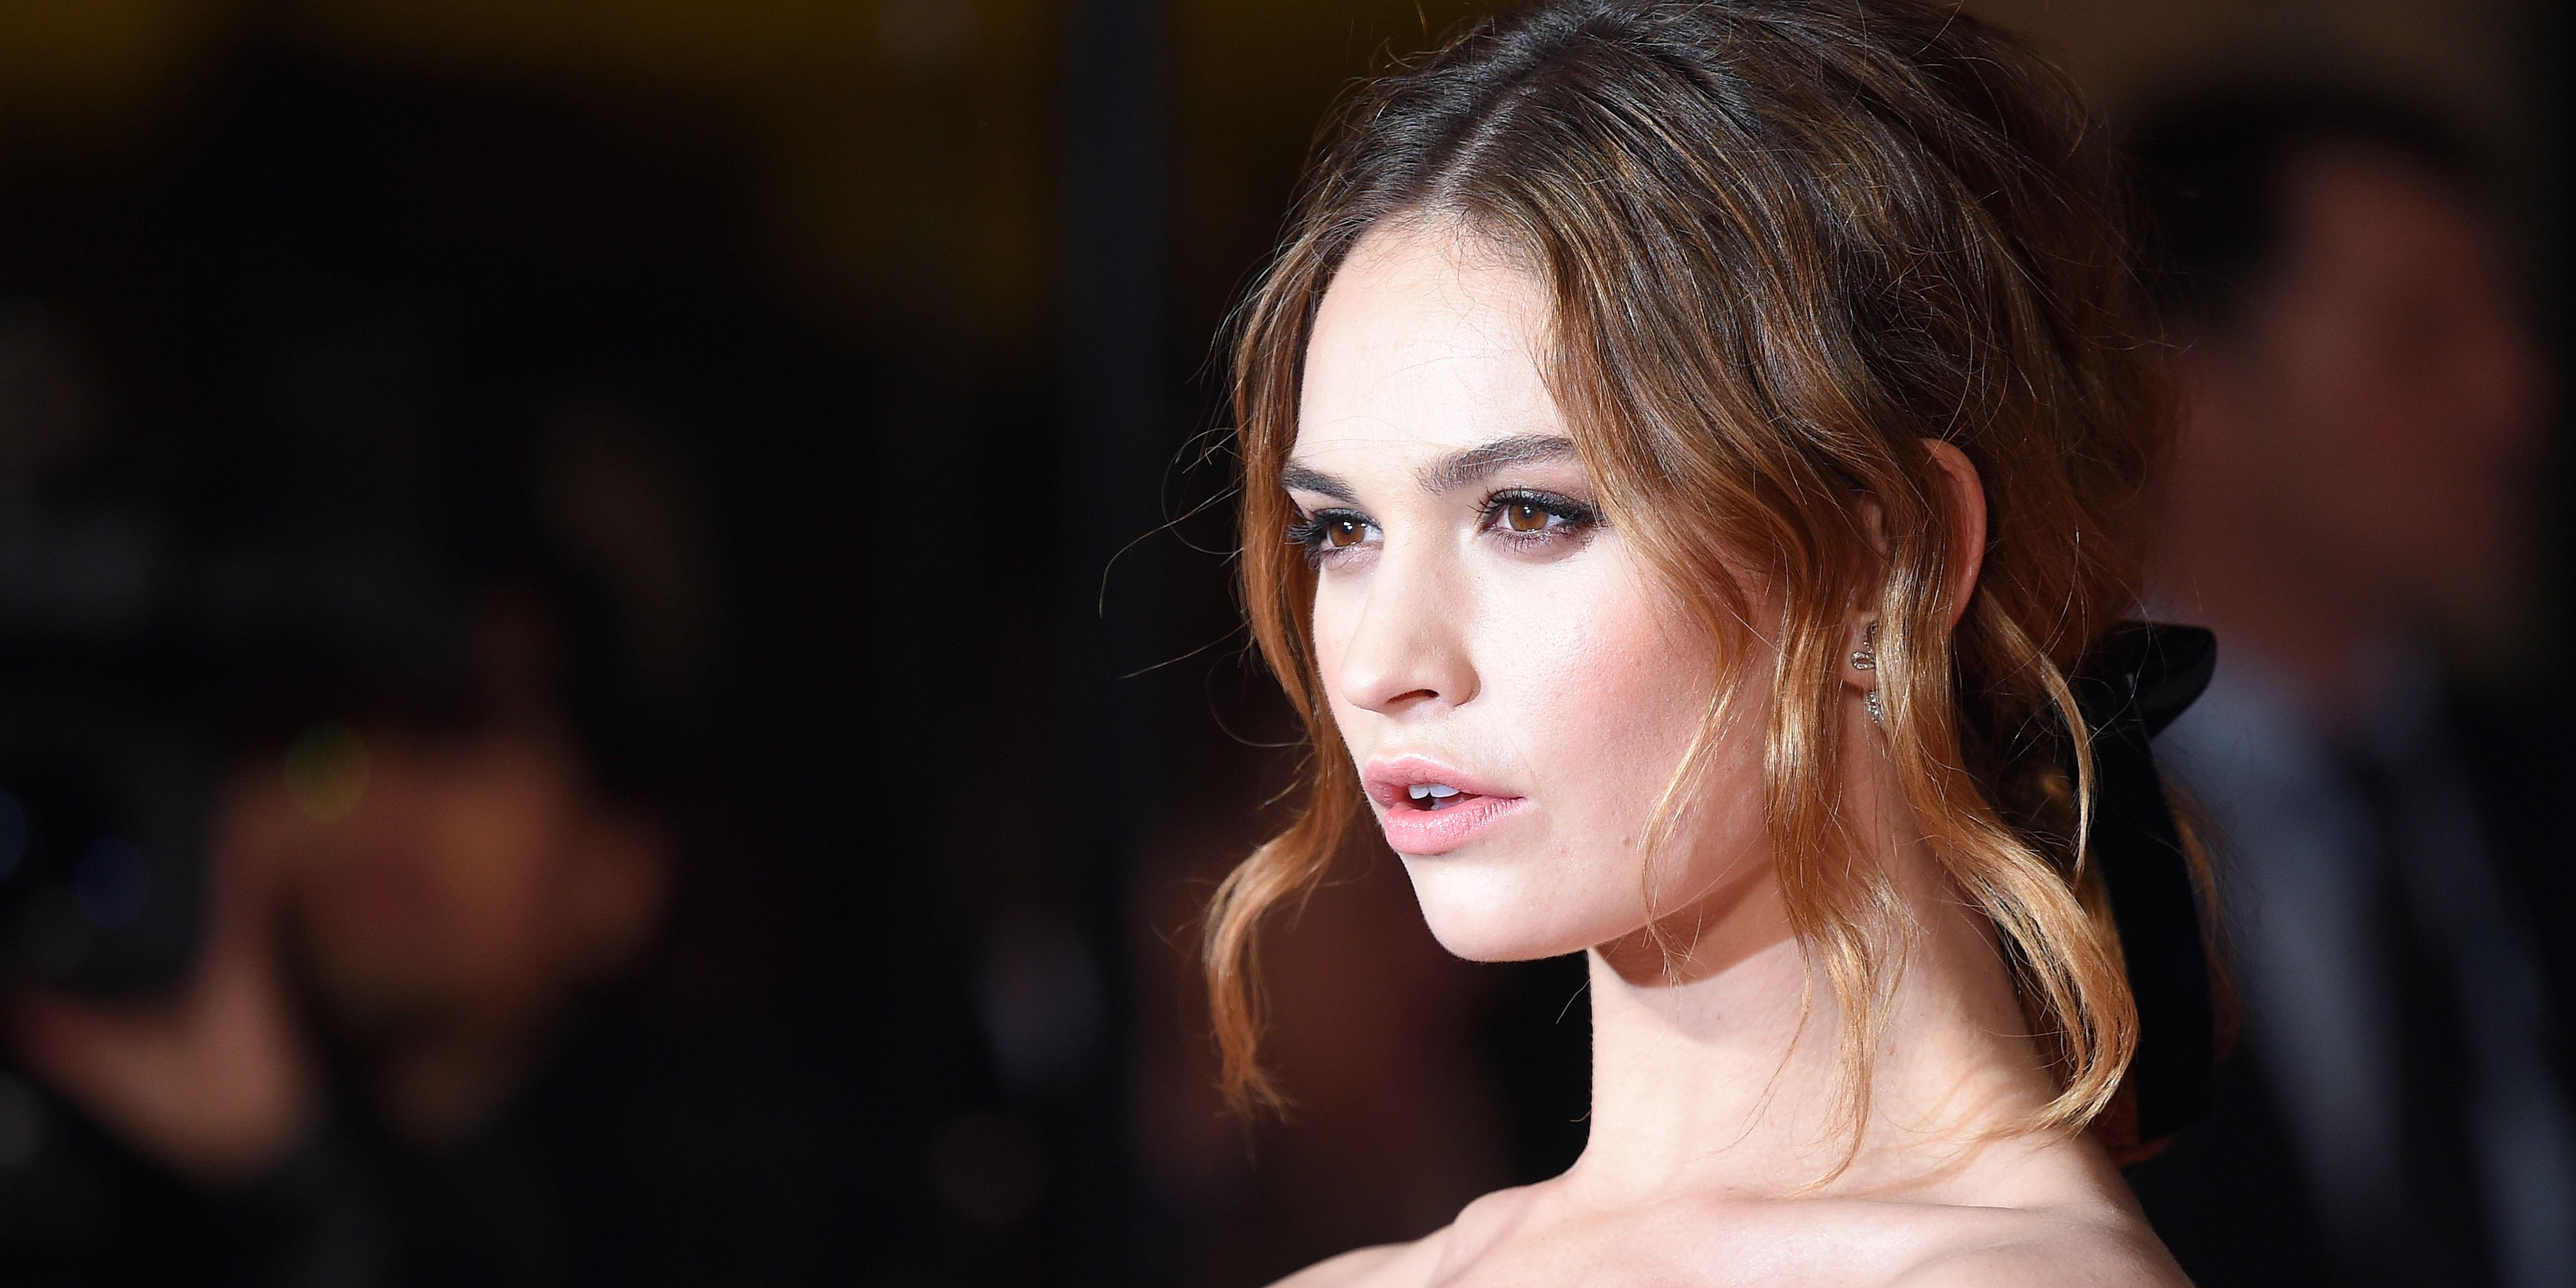 Lily James Is the Face of Burberry Fragrance - Lily James for